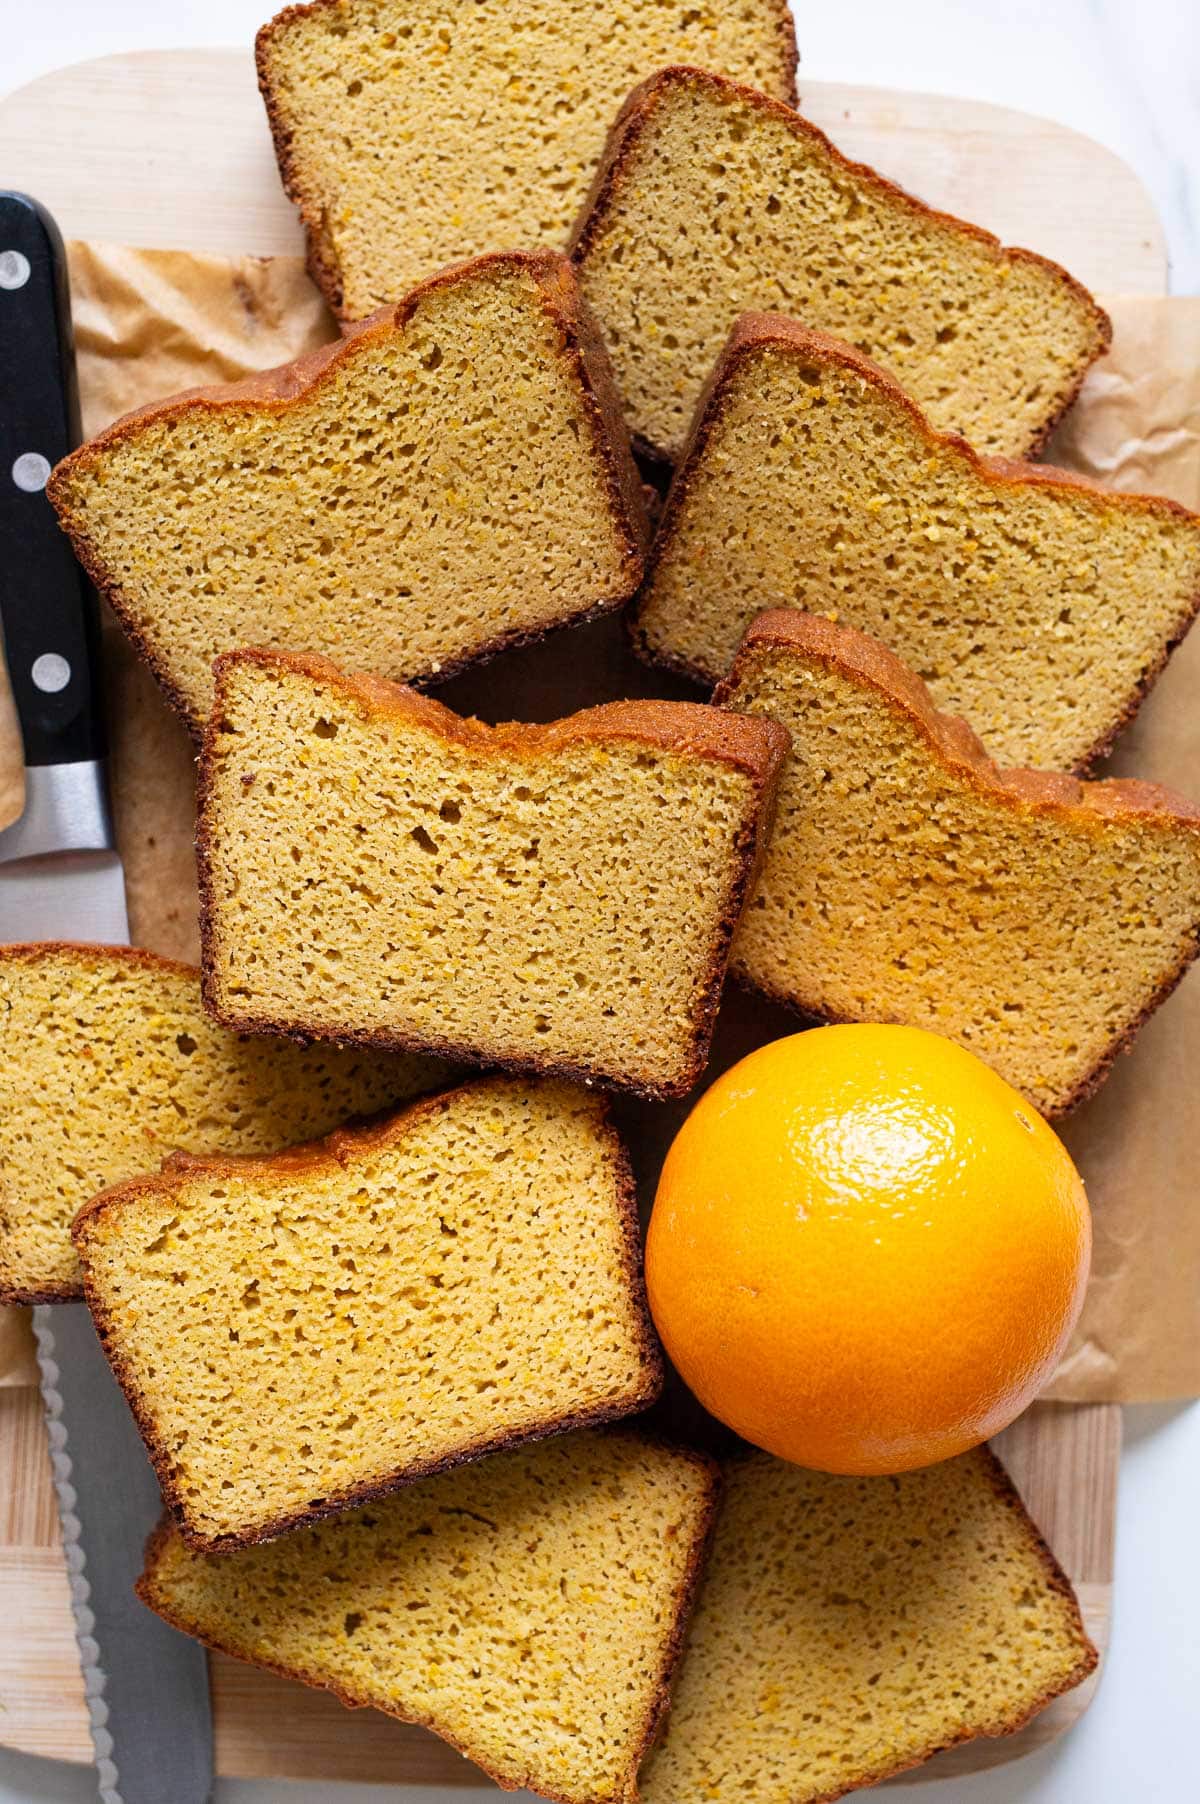 Slices of whole orange blender cake on a cutting board with whole orange and knife next to it.